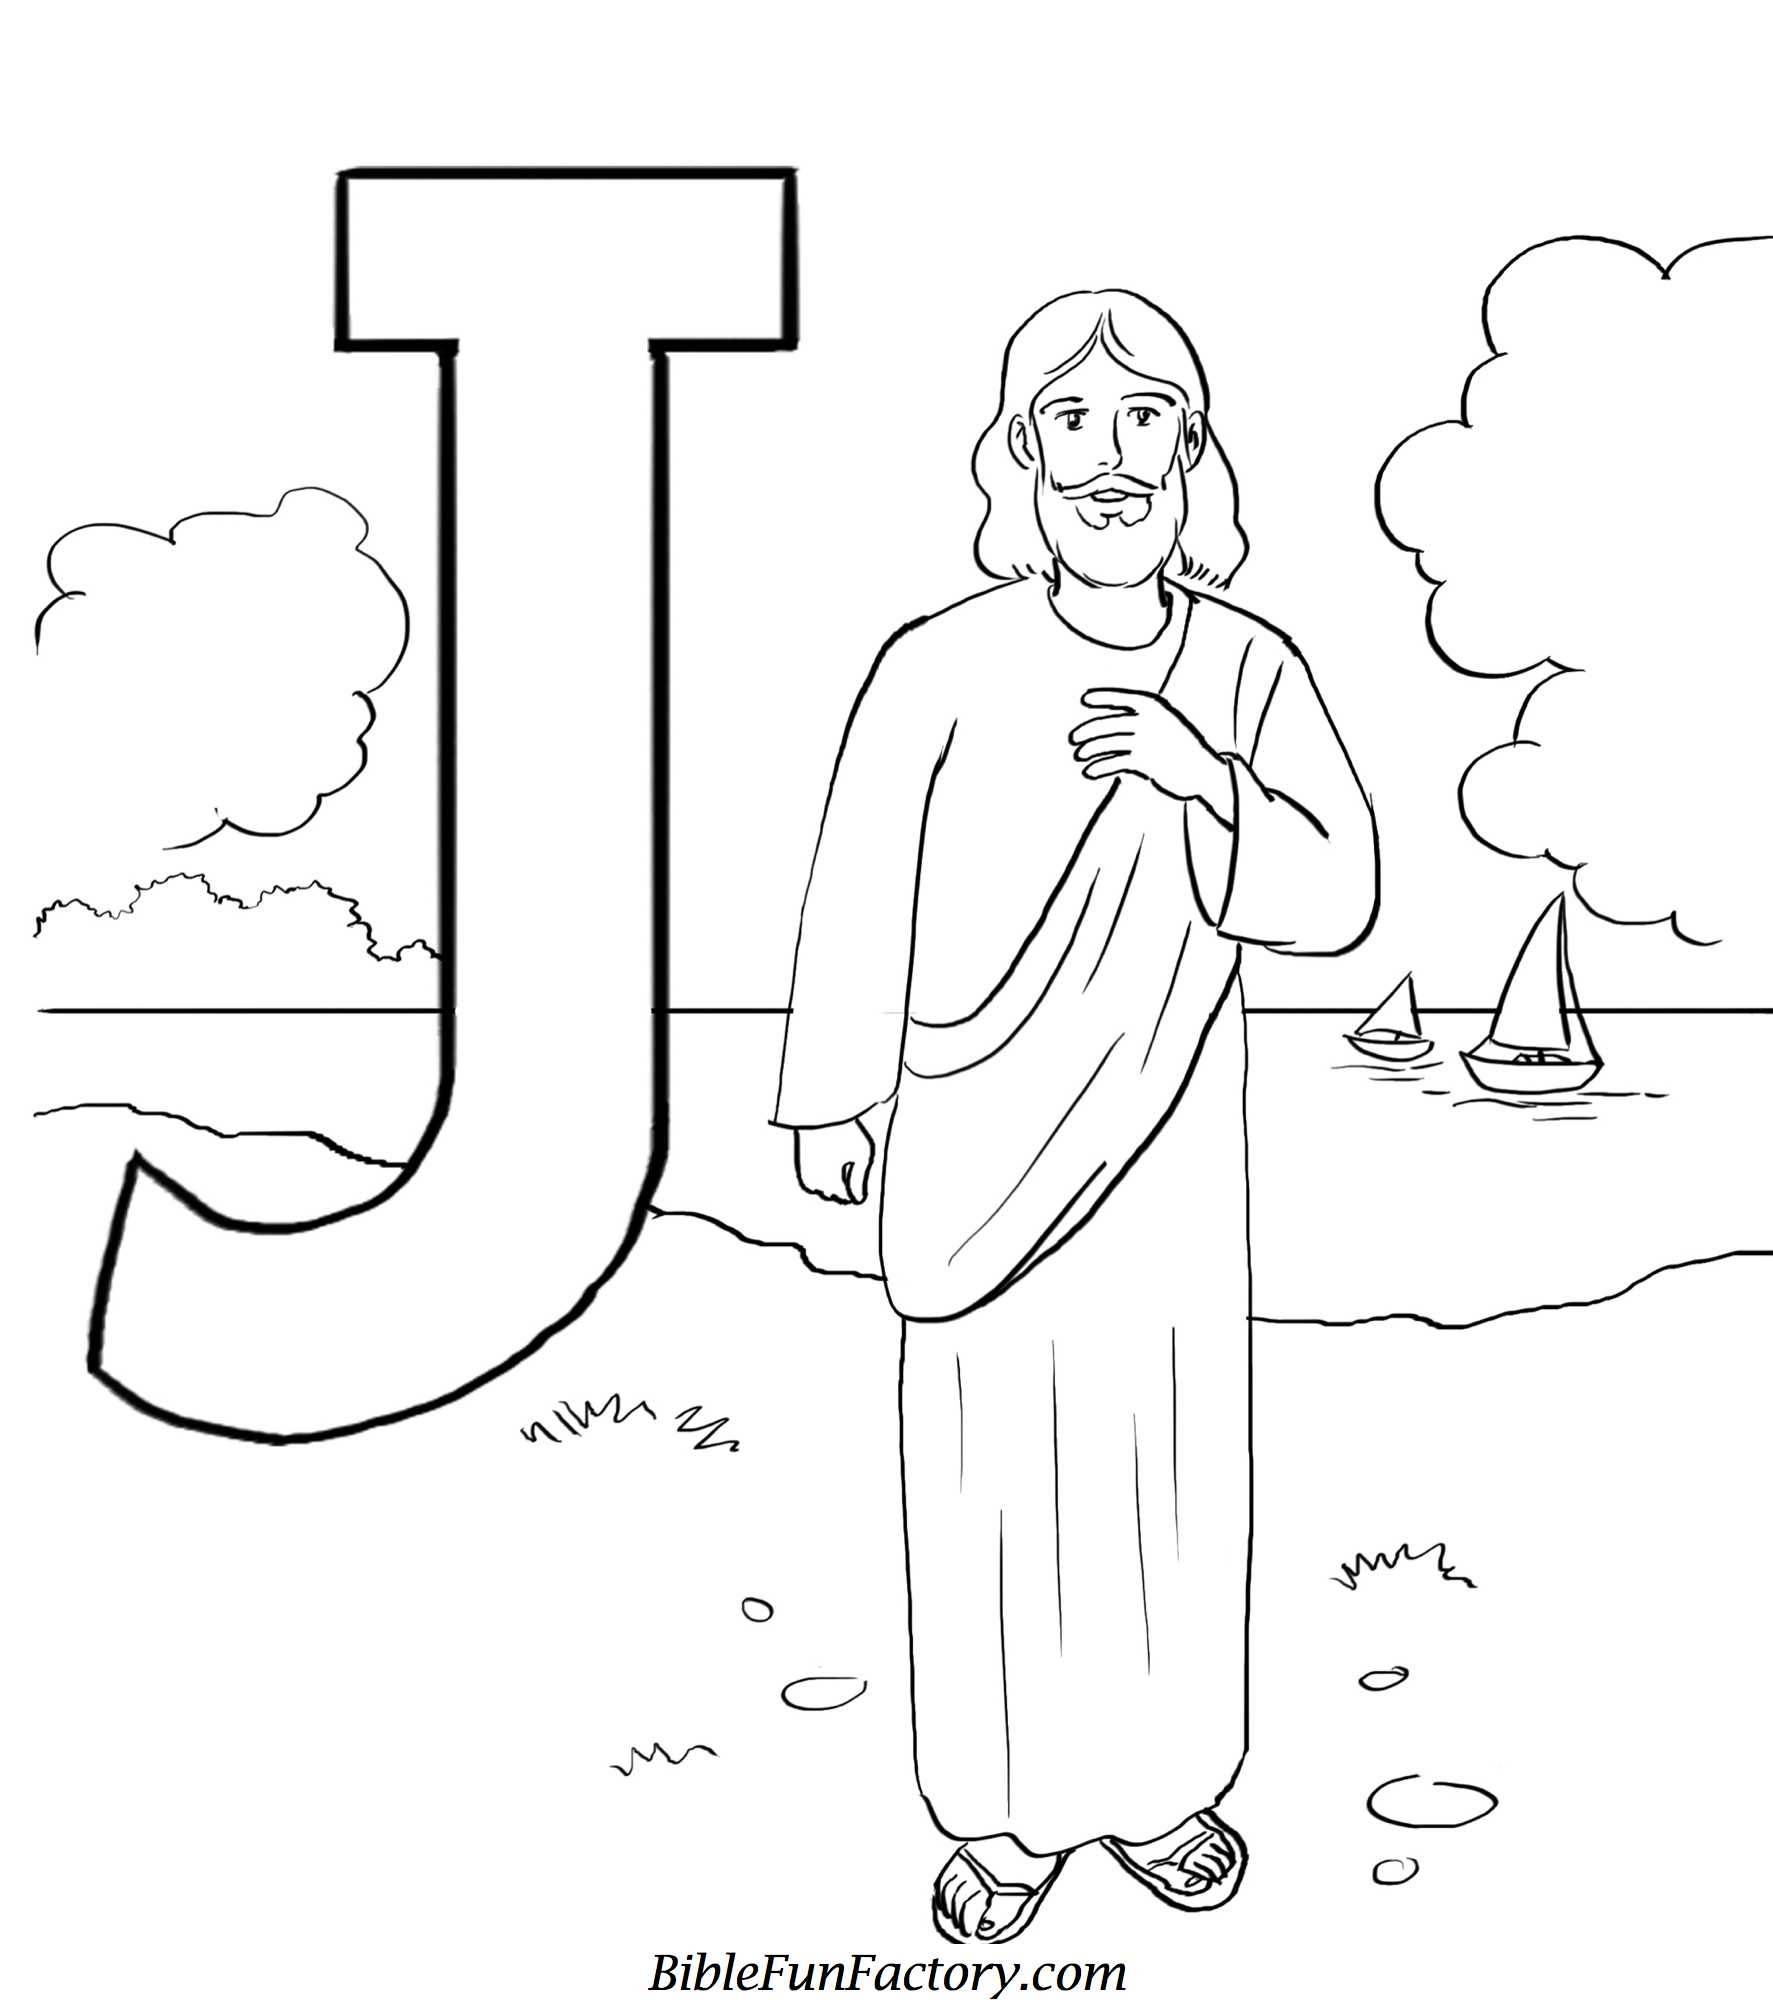 Jesus Children Coloring Page
 Free Jesus Coloring Pages Bible Lessons Games and